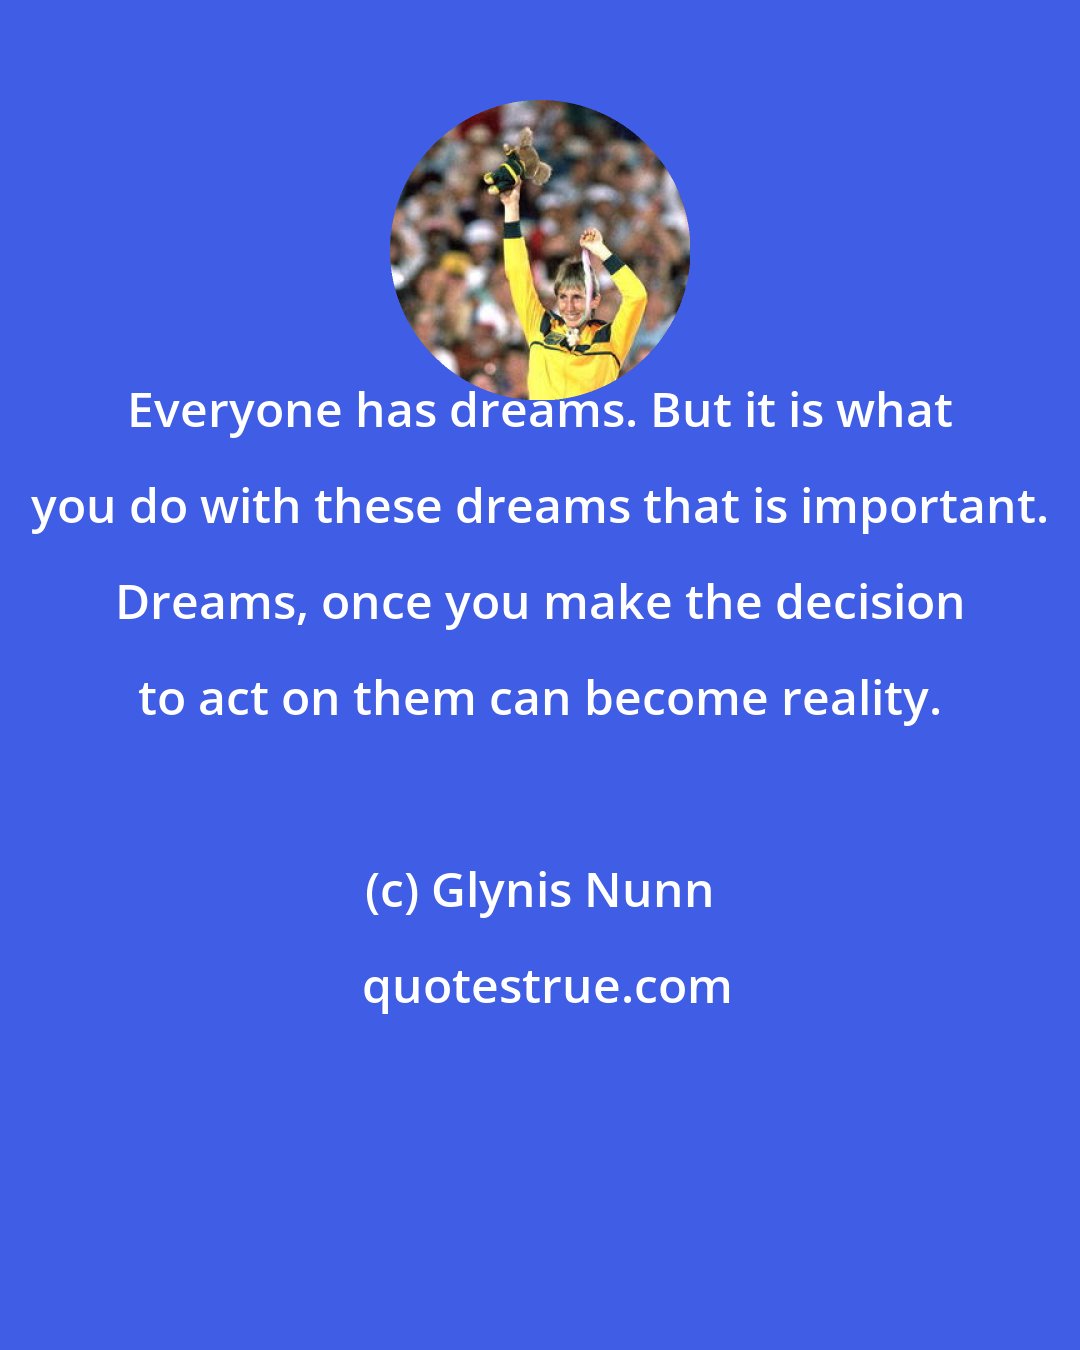 Glynis Nunn: Everyone has dreams. But it is what you do with these dreams that is important. Dreams, once you make the decision to act on them can become reality.